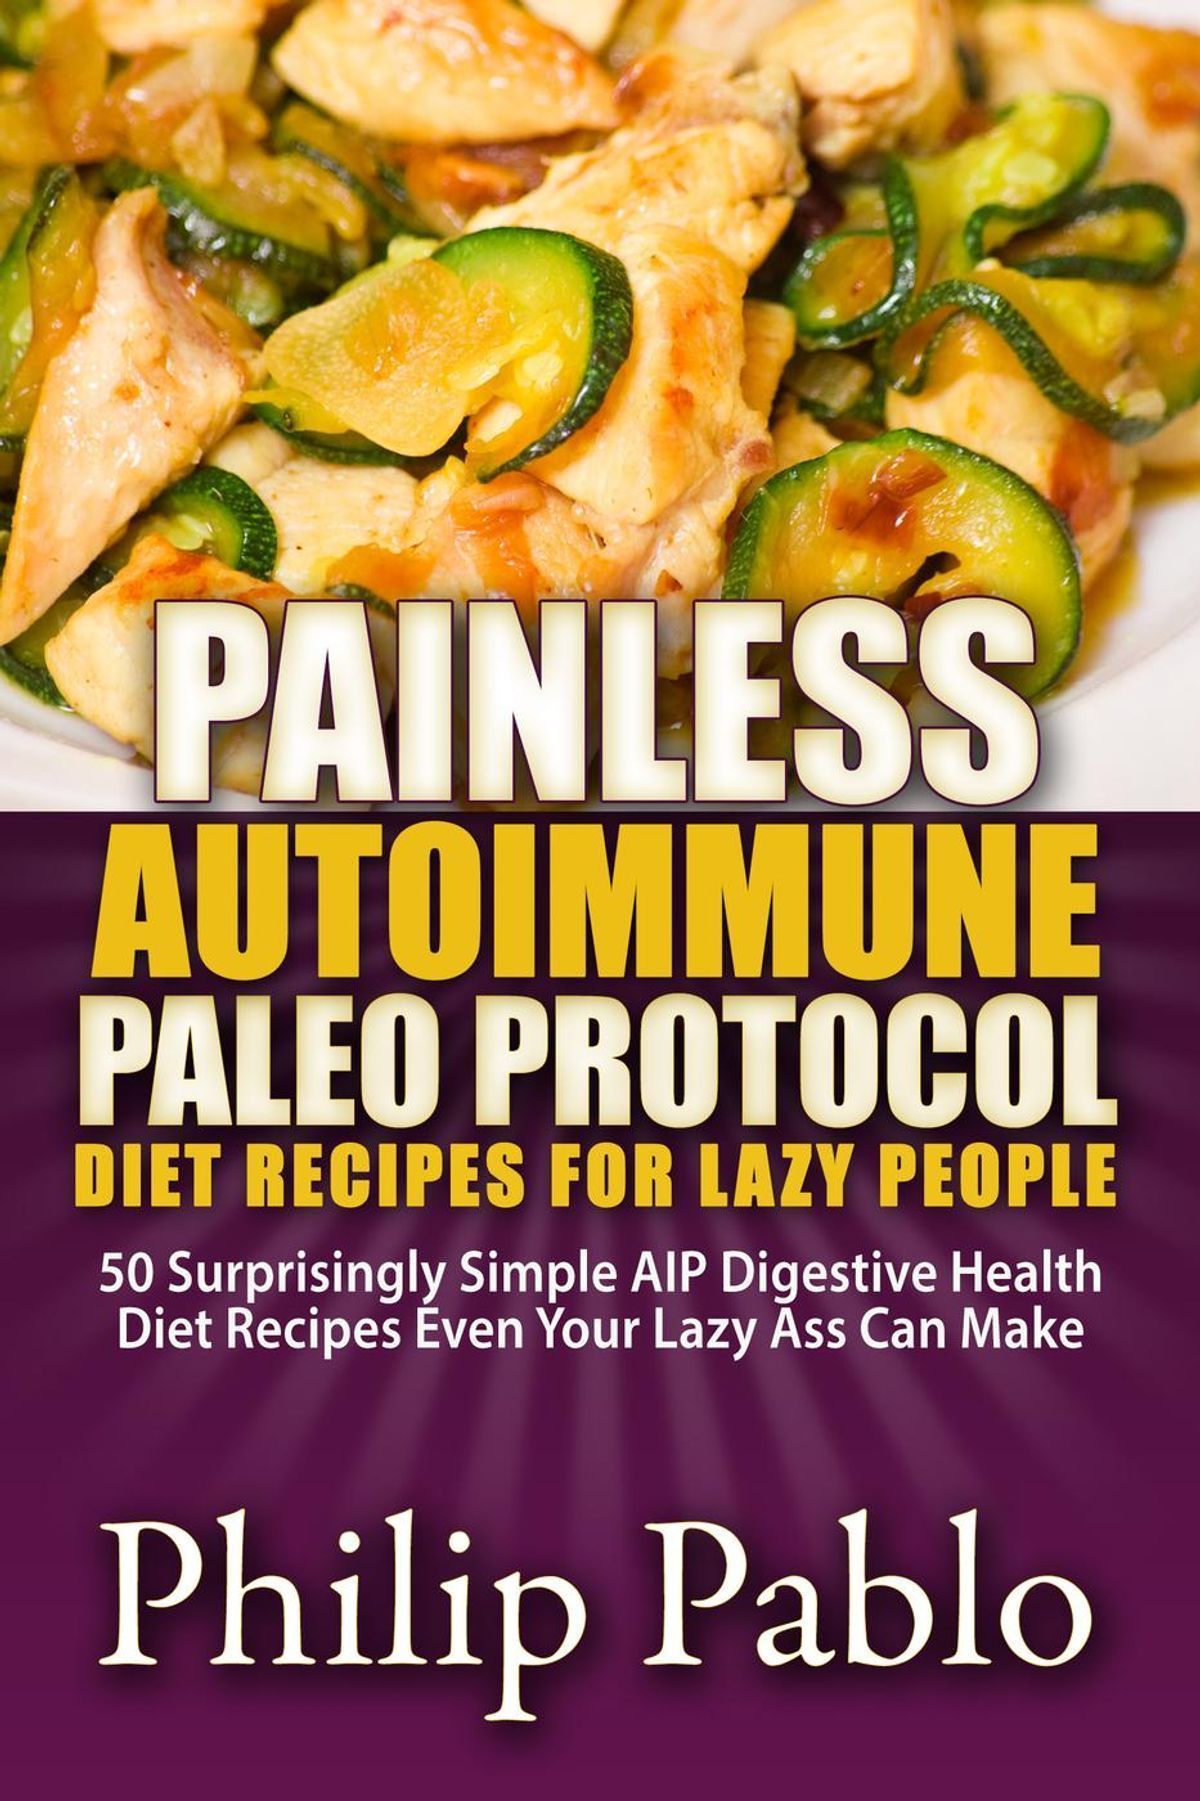 Painless Autoimmune Paleo Protocol Diet Recipes For Lazy People: 50 Surprisingly Simple AIP Digestive Health Diet Recipes Even Your Lazy Ass Can Make - eBook - Walmart.com -   17 diet Paleo health ideas